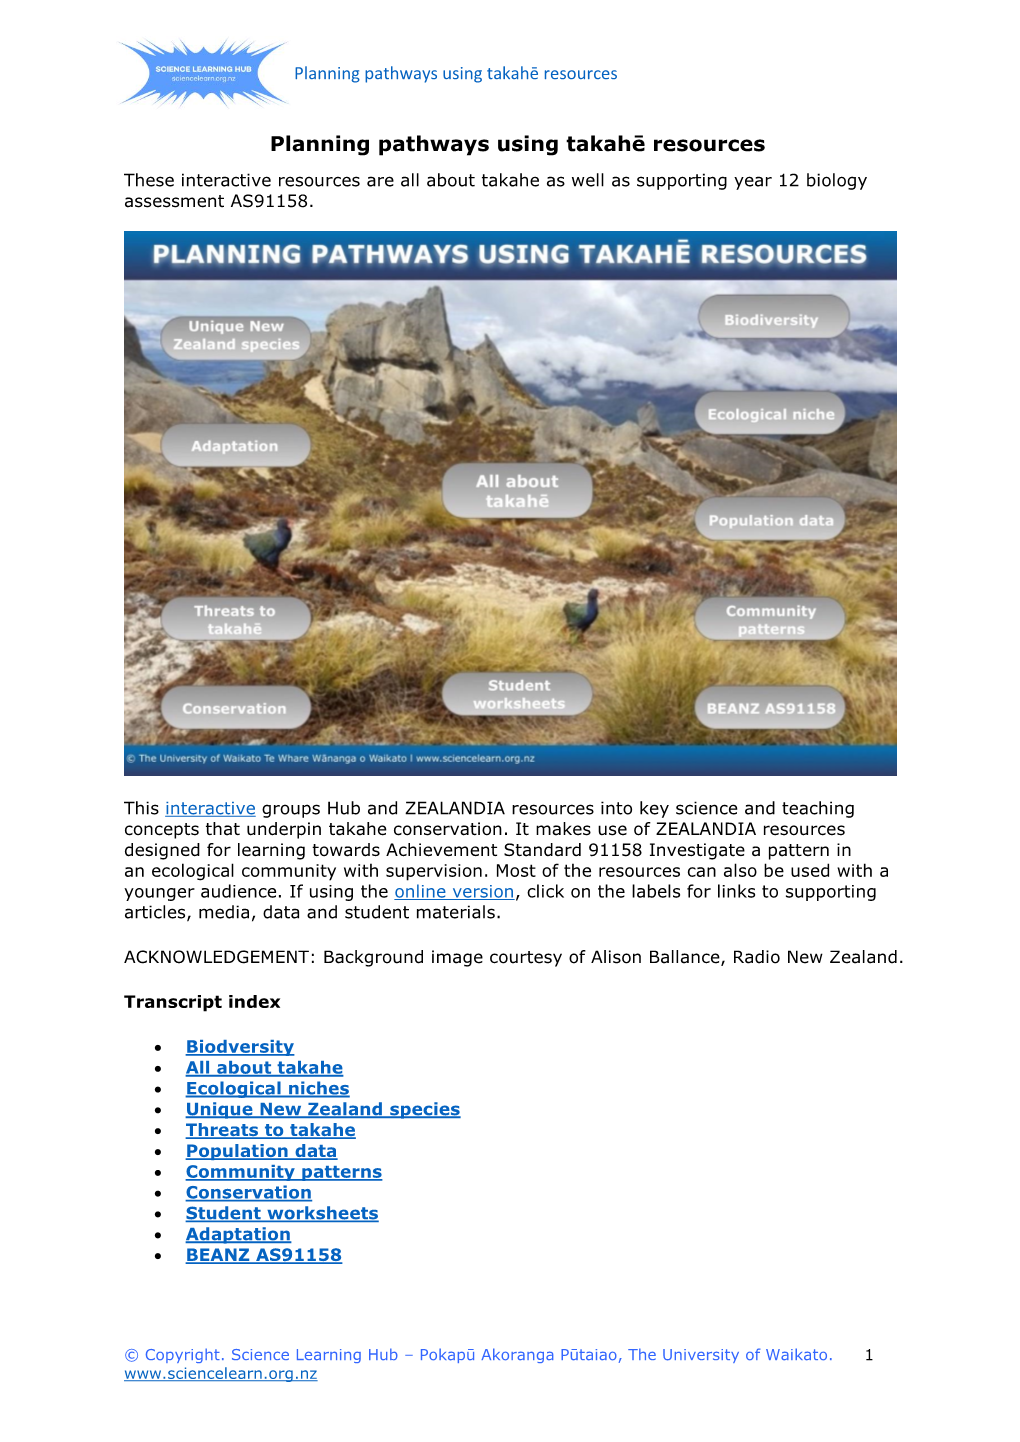 Planning Pathways Using Takahē Resources